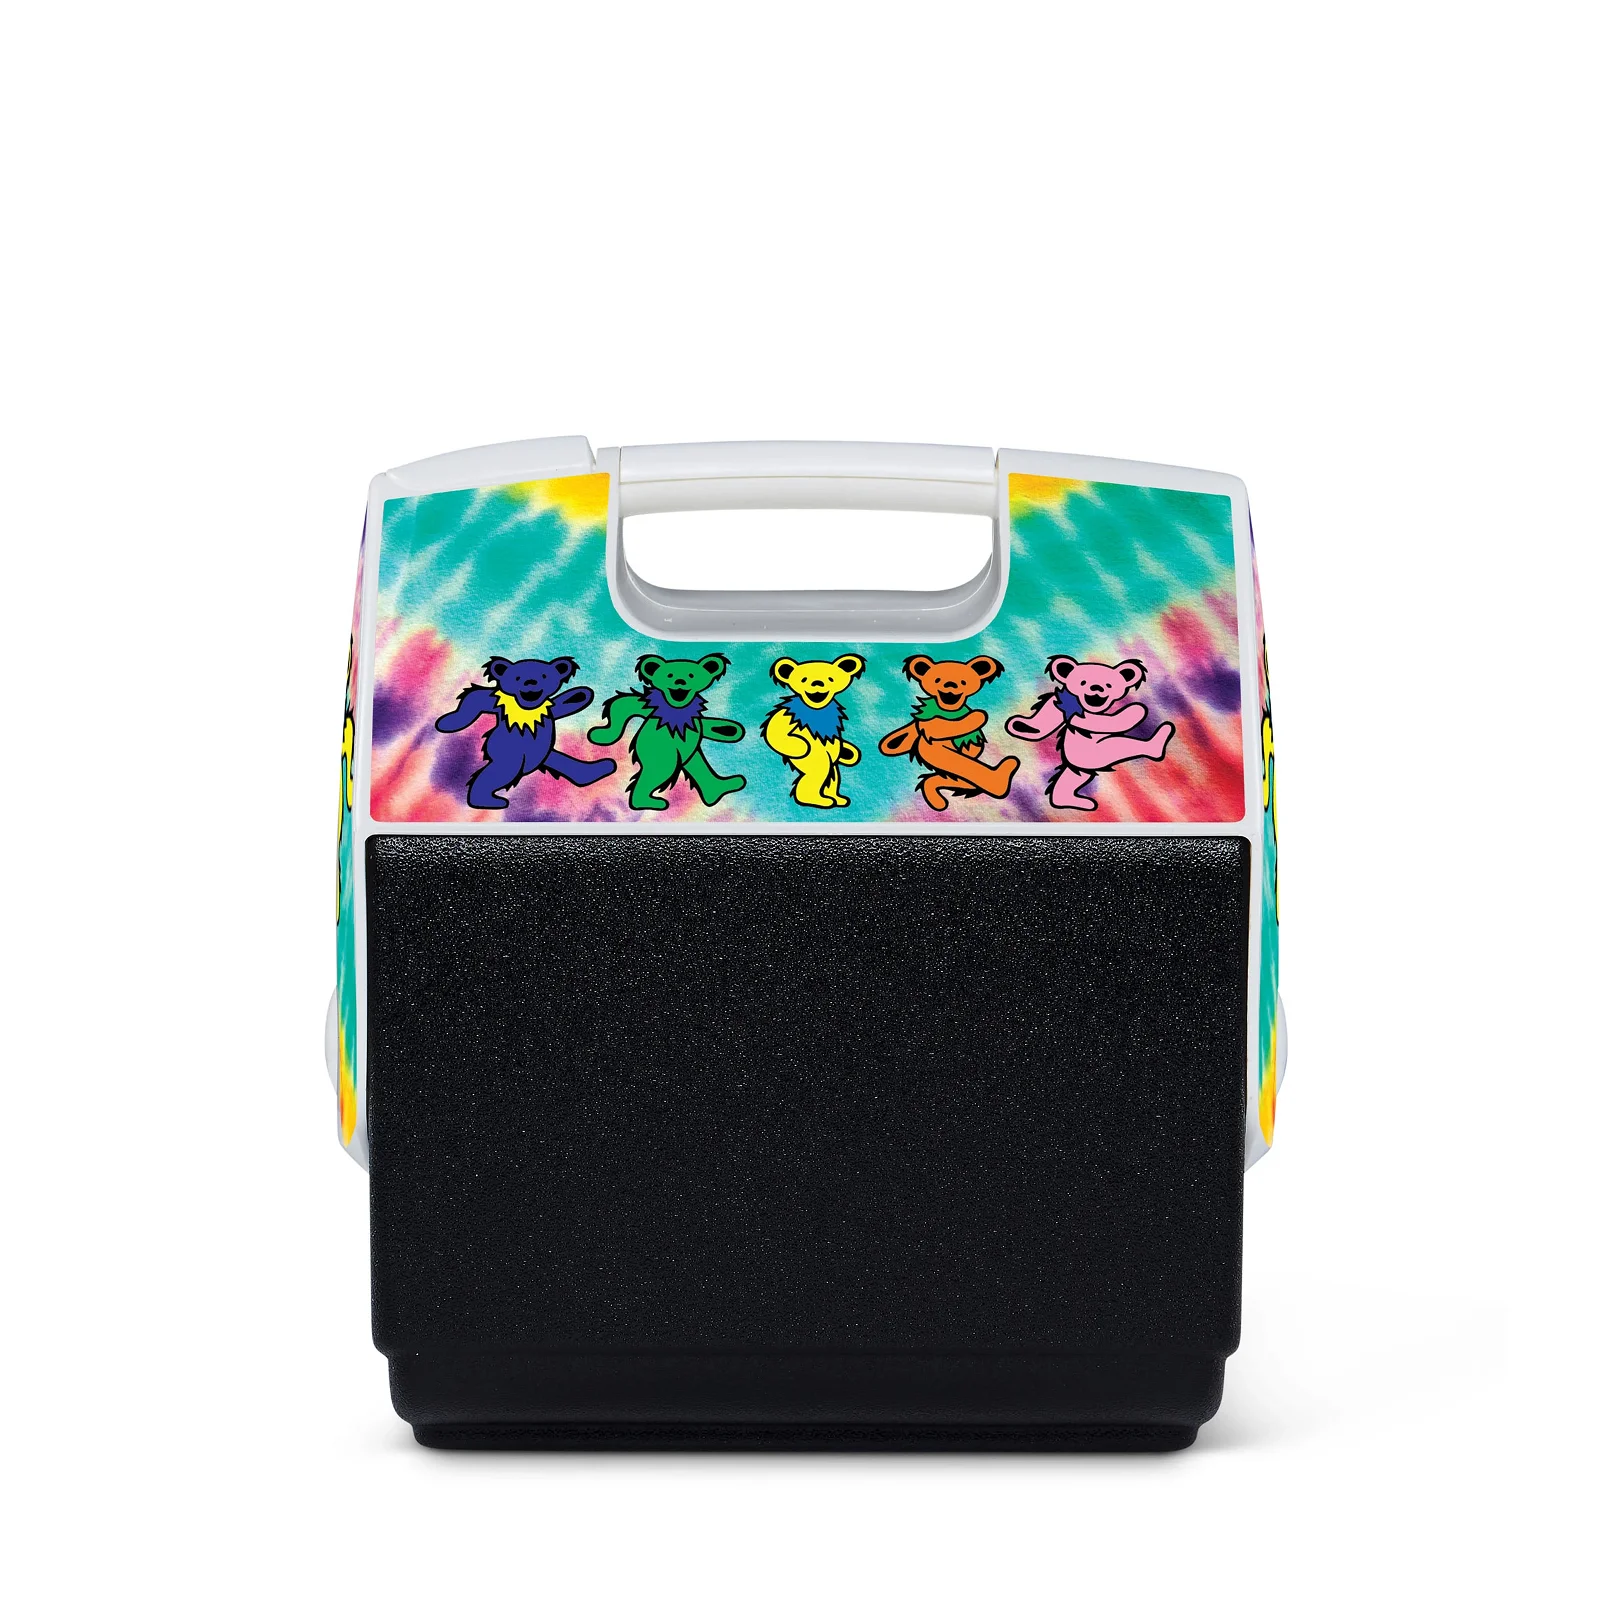 Igloo Coolers: Rock and roll will CHILL out with the Grateful Dead